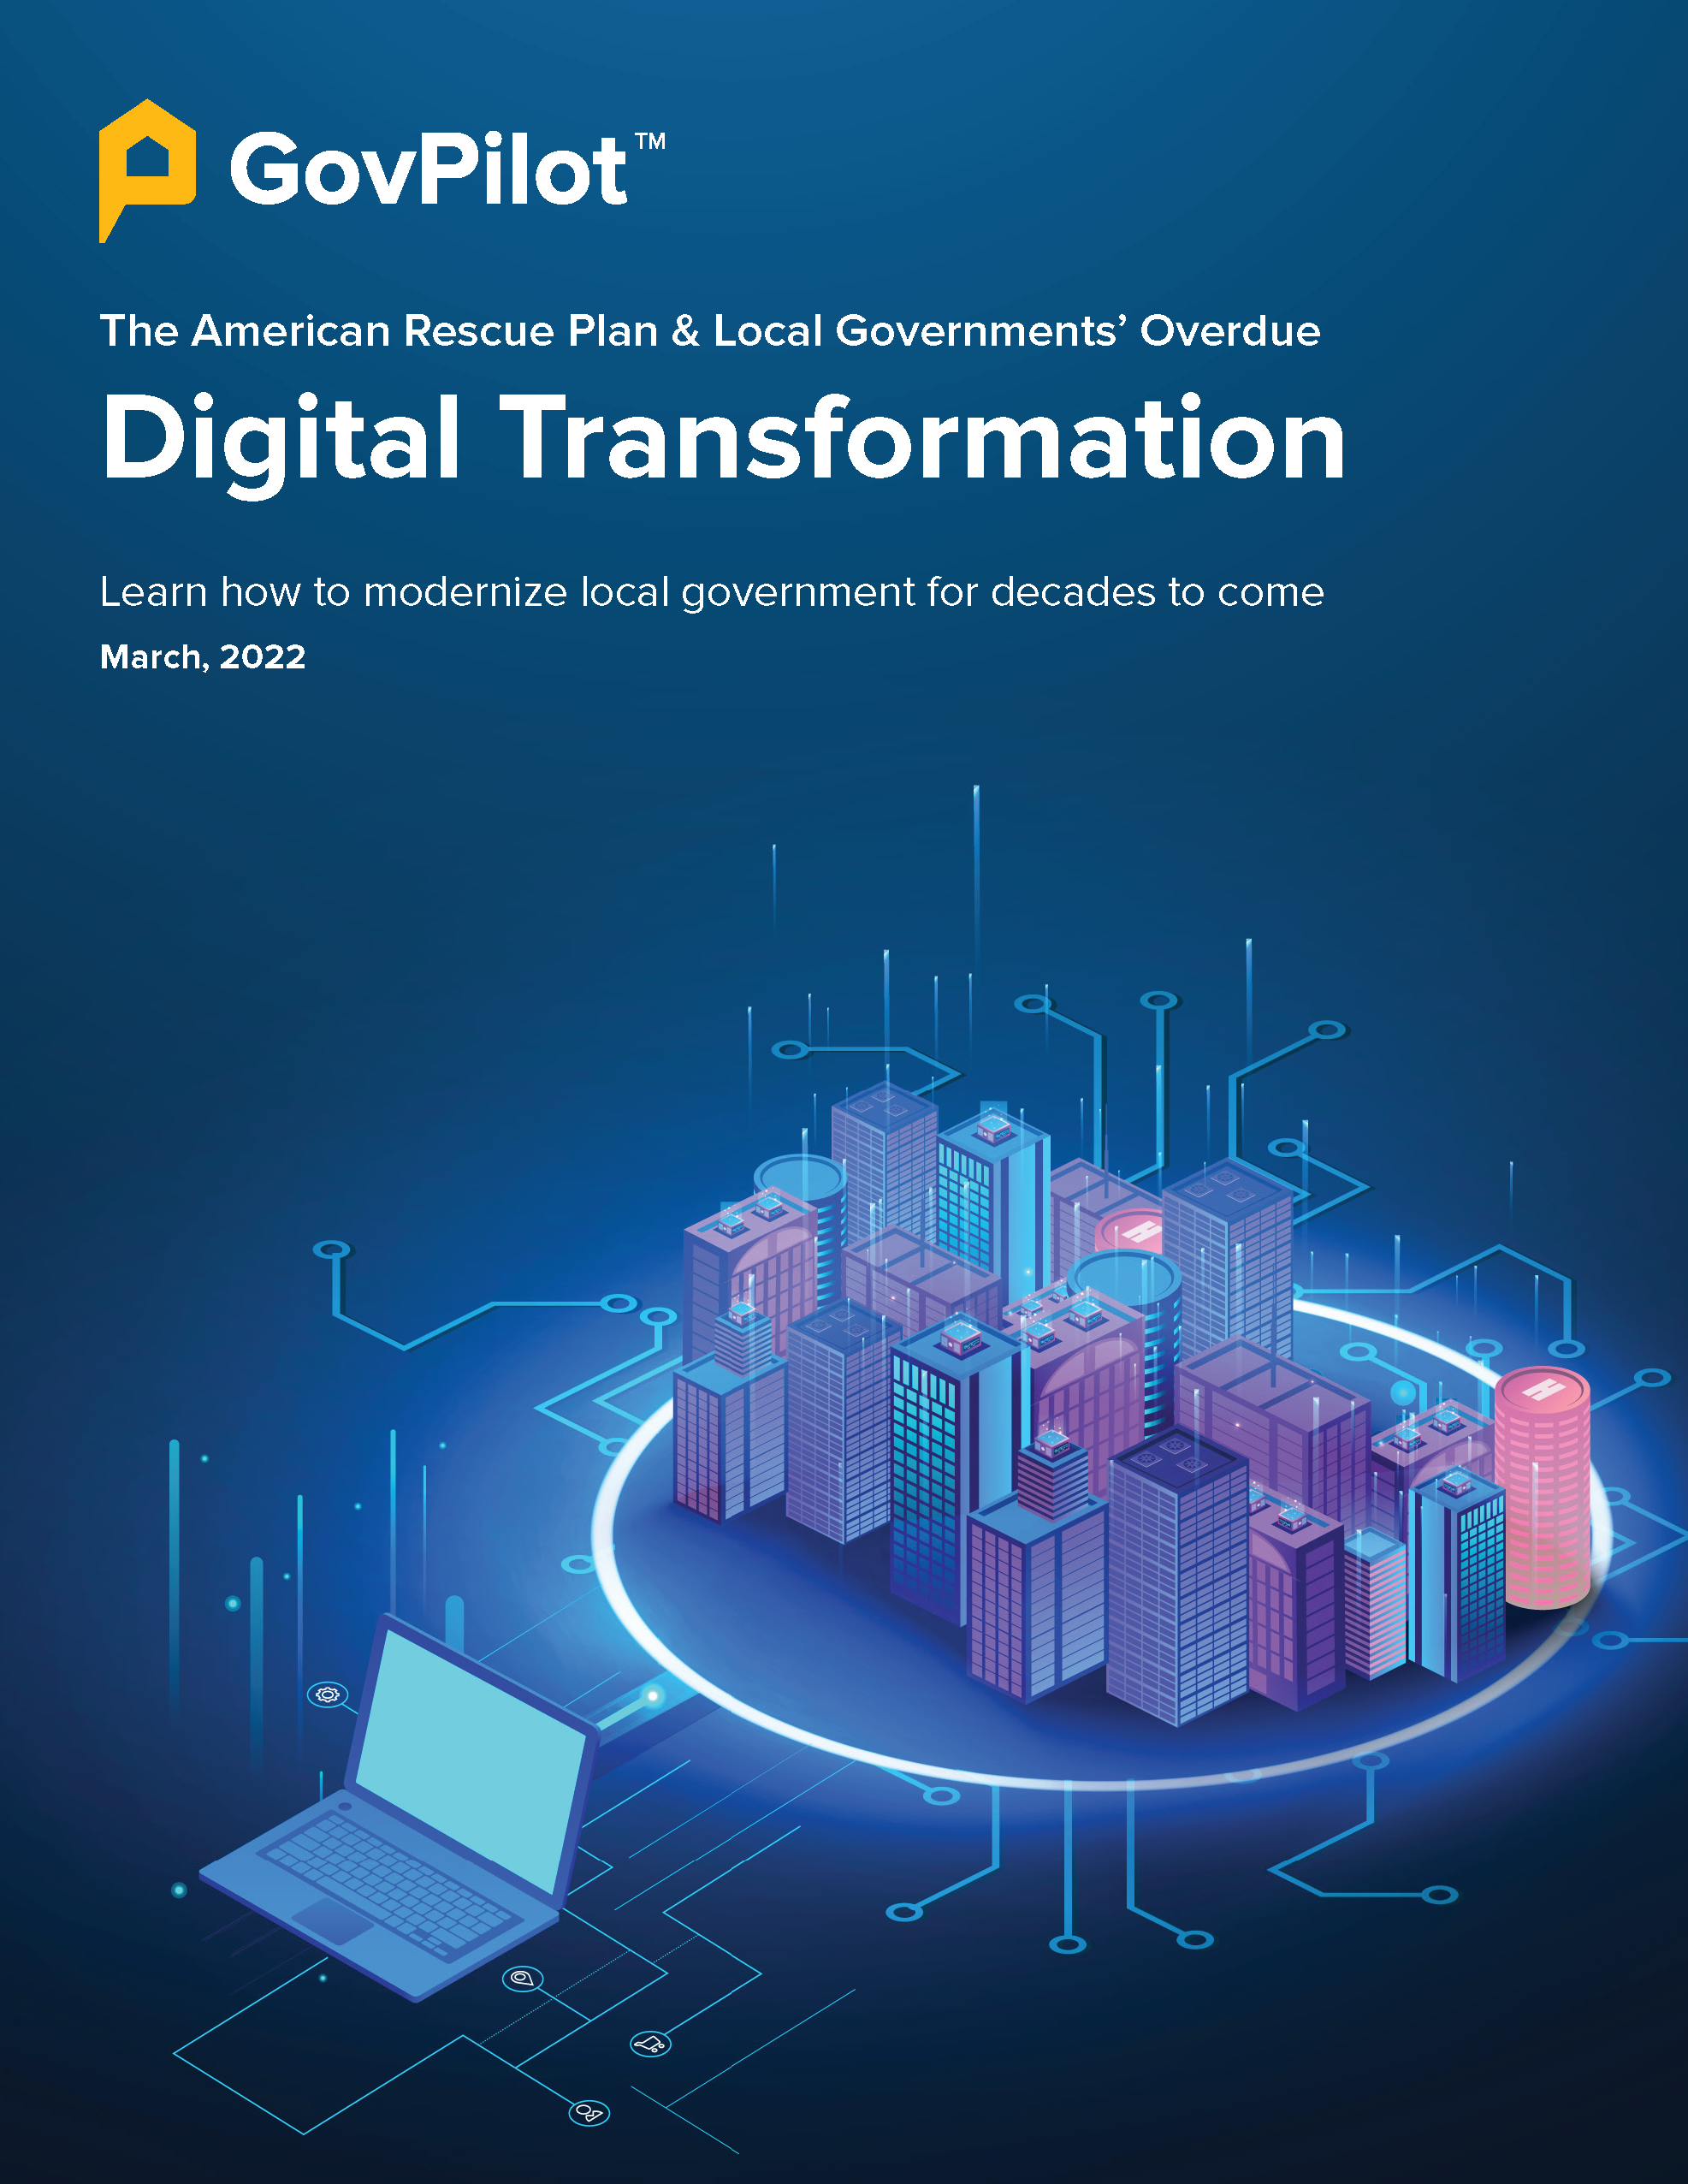 GovPilot eBook: Digital Transformation and the American Rescue Plan Act March 2022